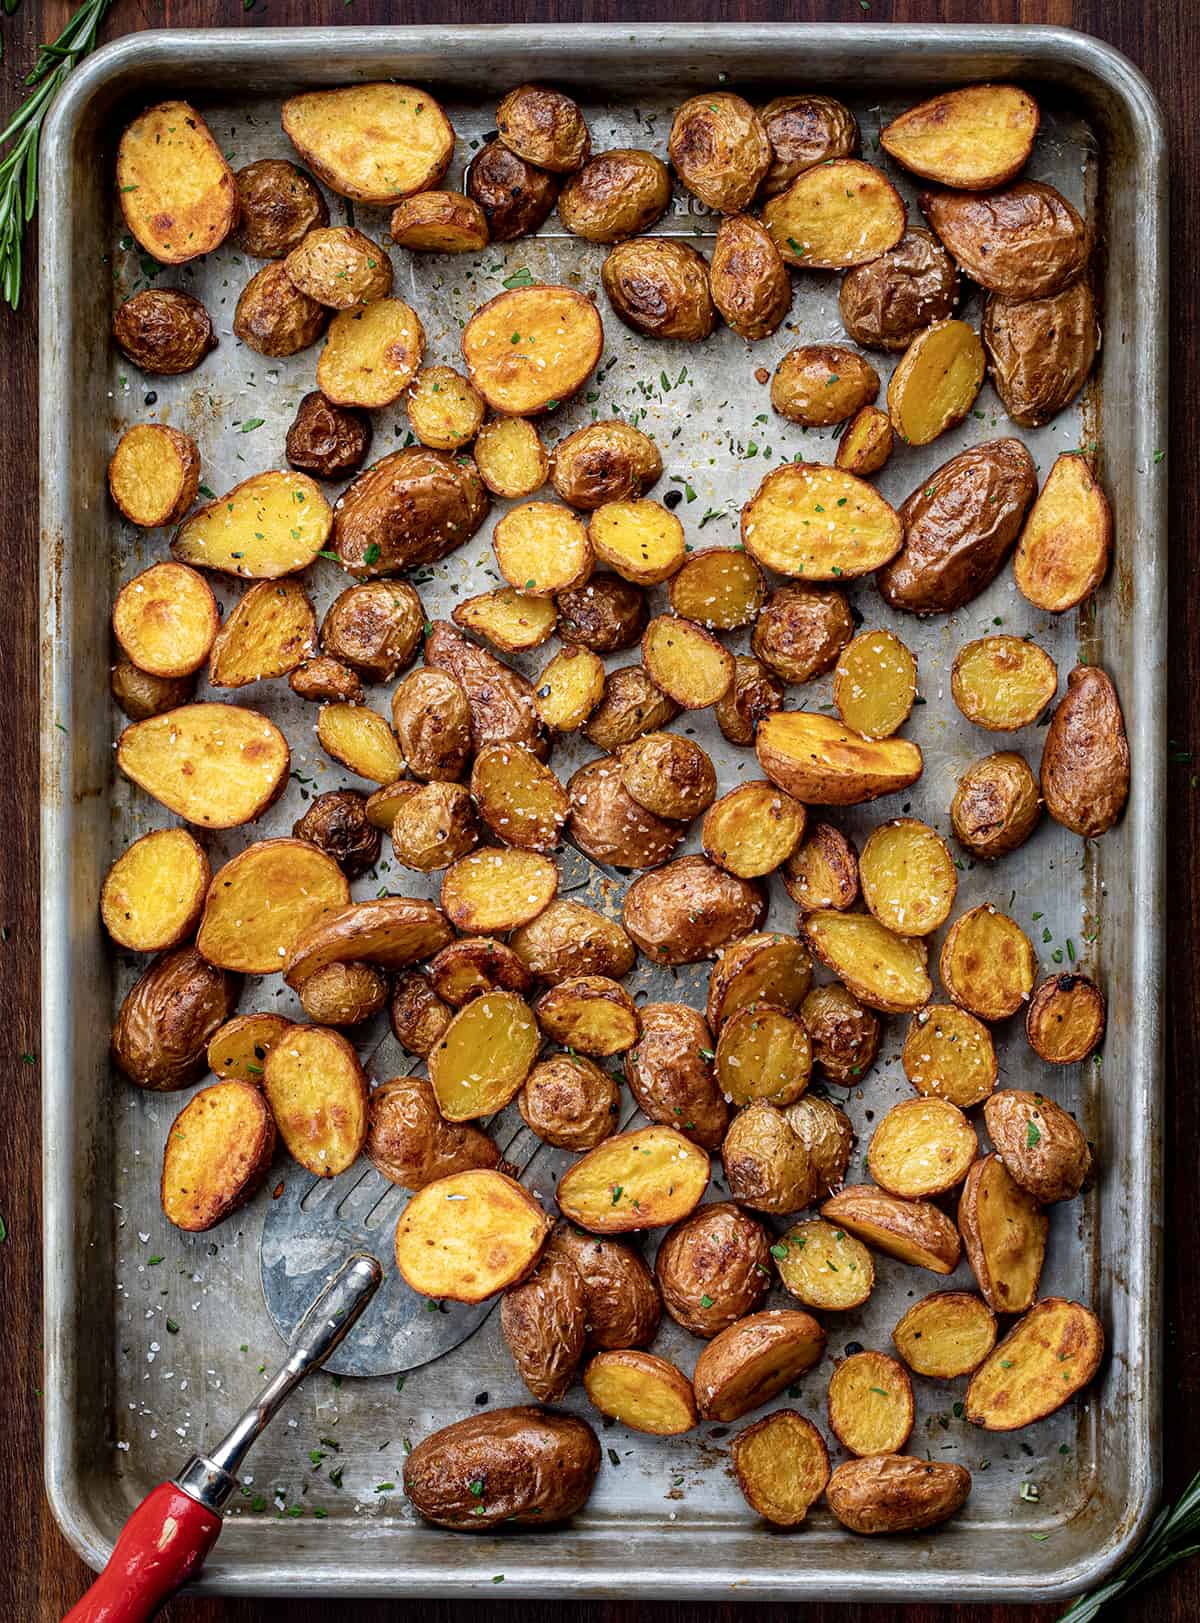 Sheet Pan Covered in Roasted Potatoes After They have Baked with a Spatula.